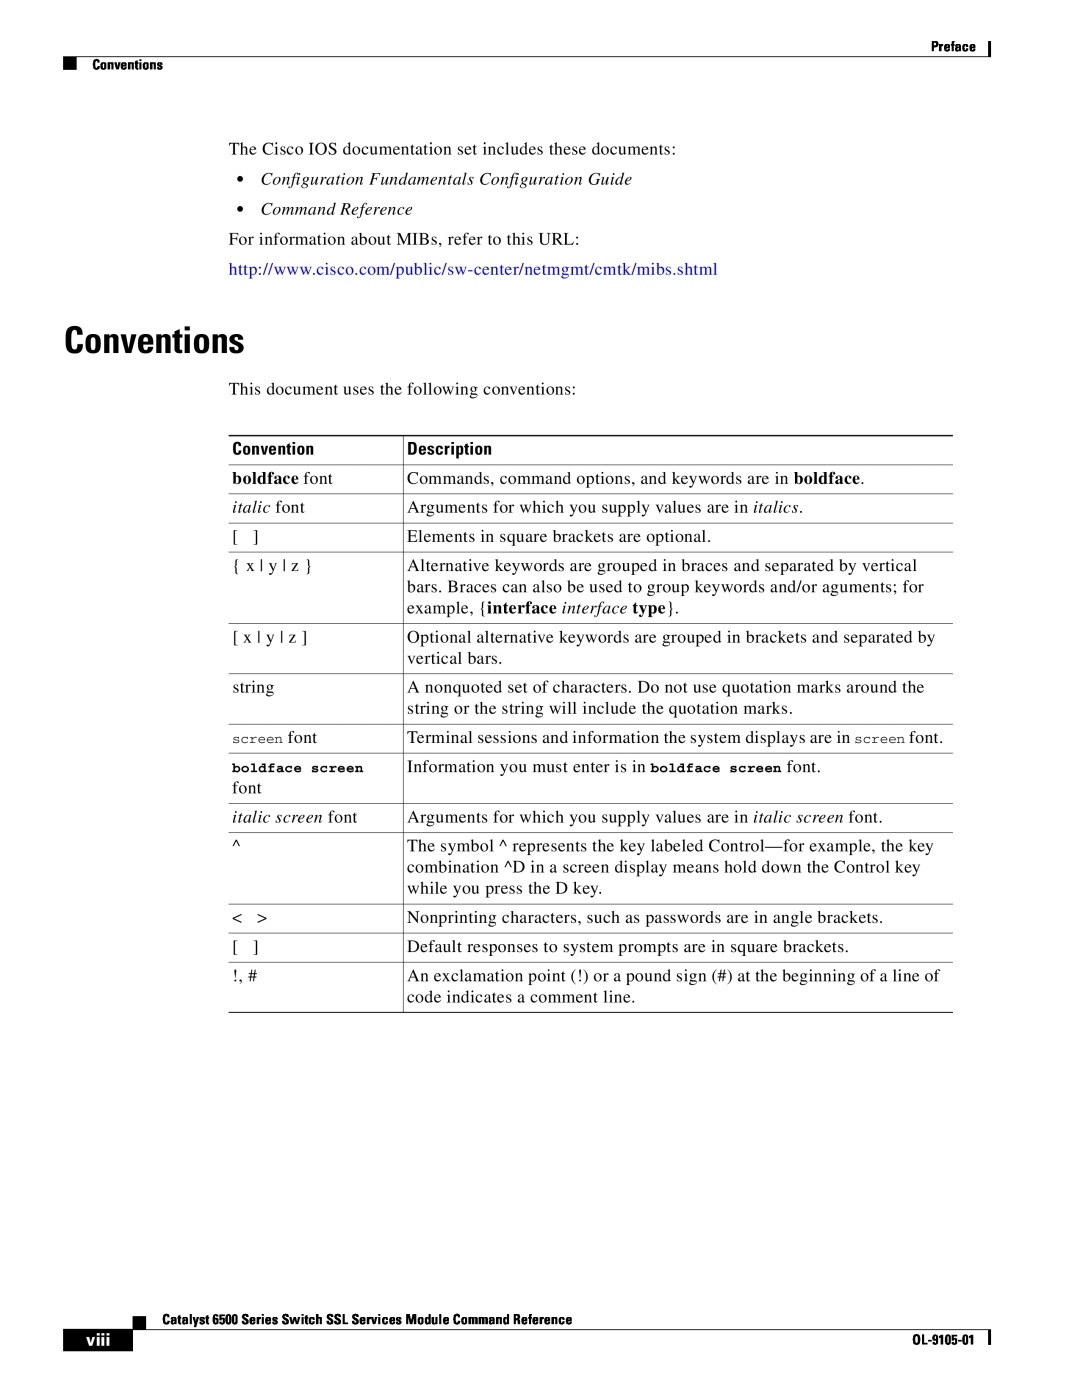 Cisco Systems 6500 manual Conventions, boldface font, example, interface interface type, viii, Description 